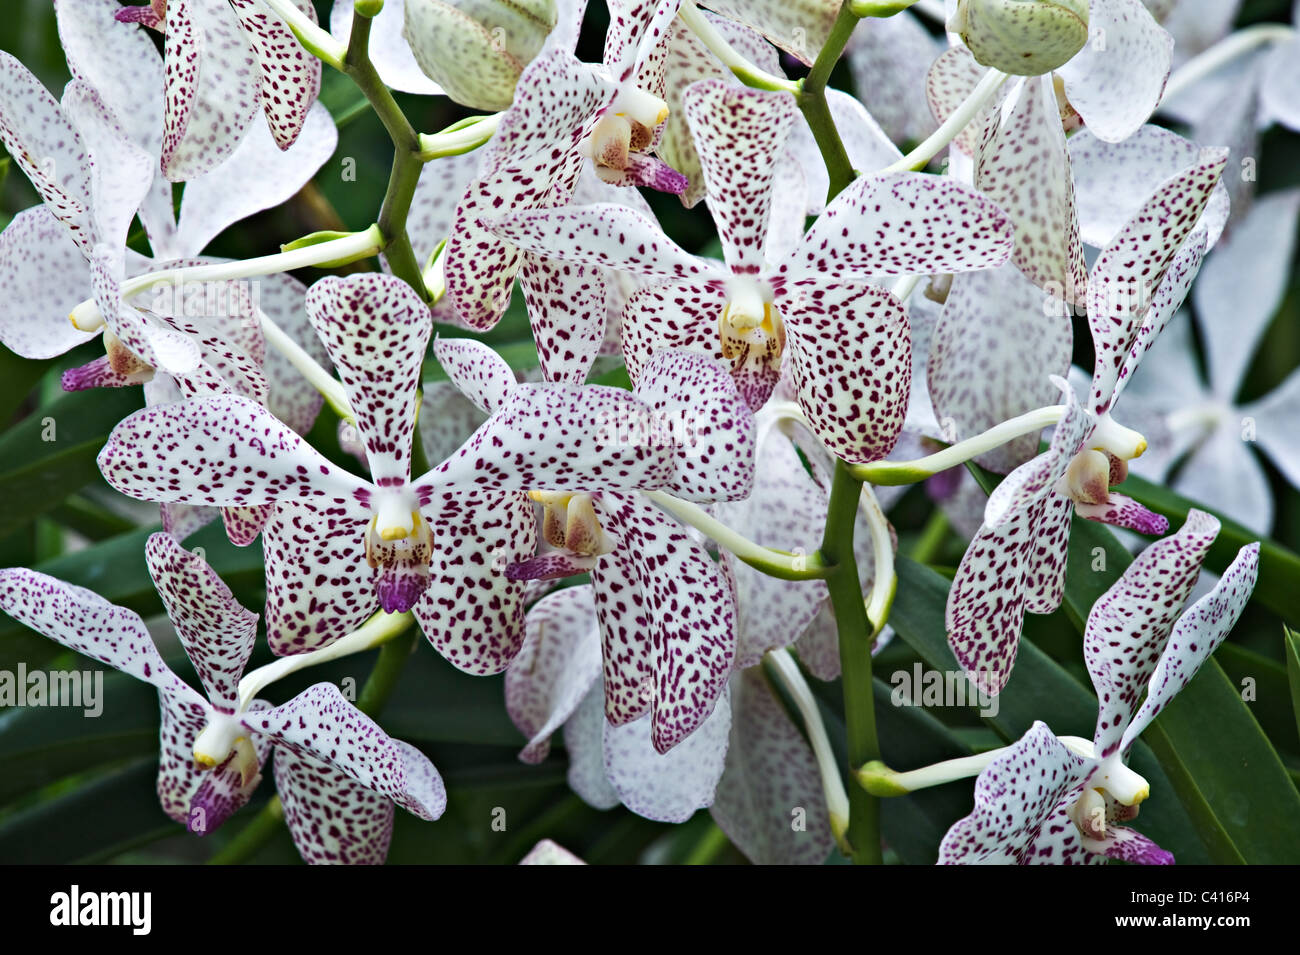 Cattleya Hybrid Orchid Flowers in the National Orchid Garden Singapore Republic of Singapore Asia Stock Photo